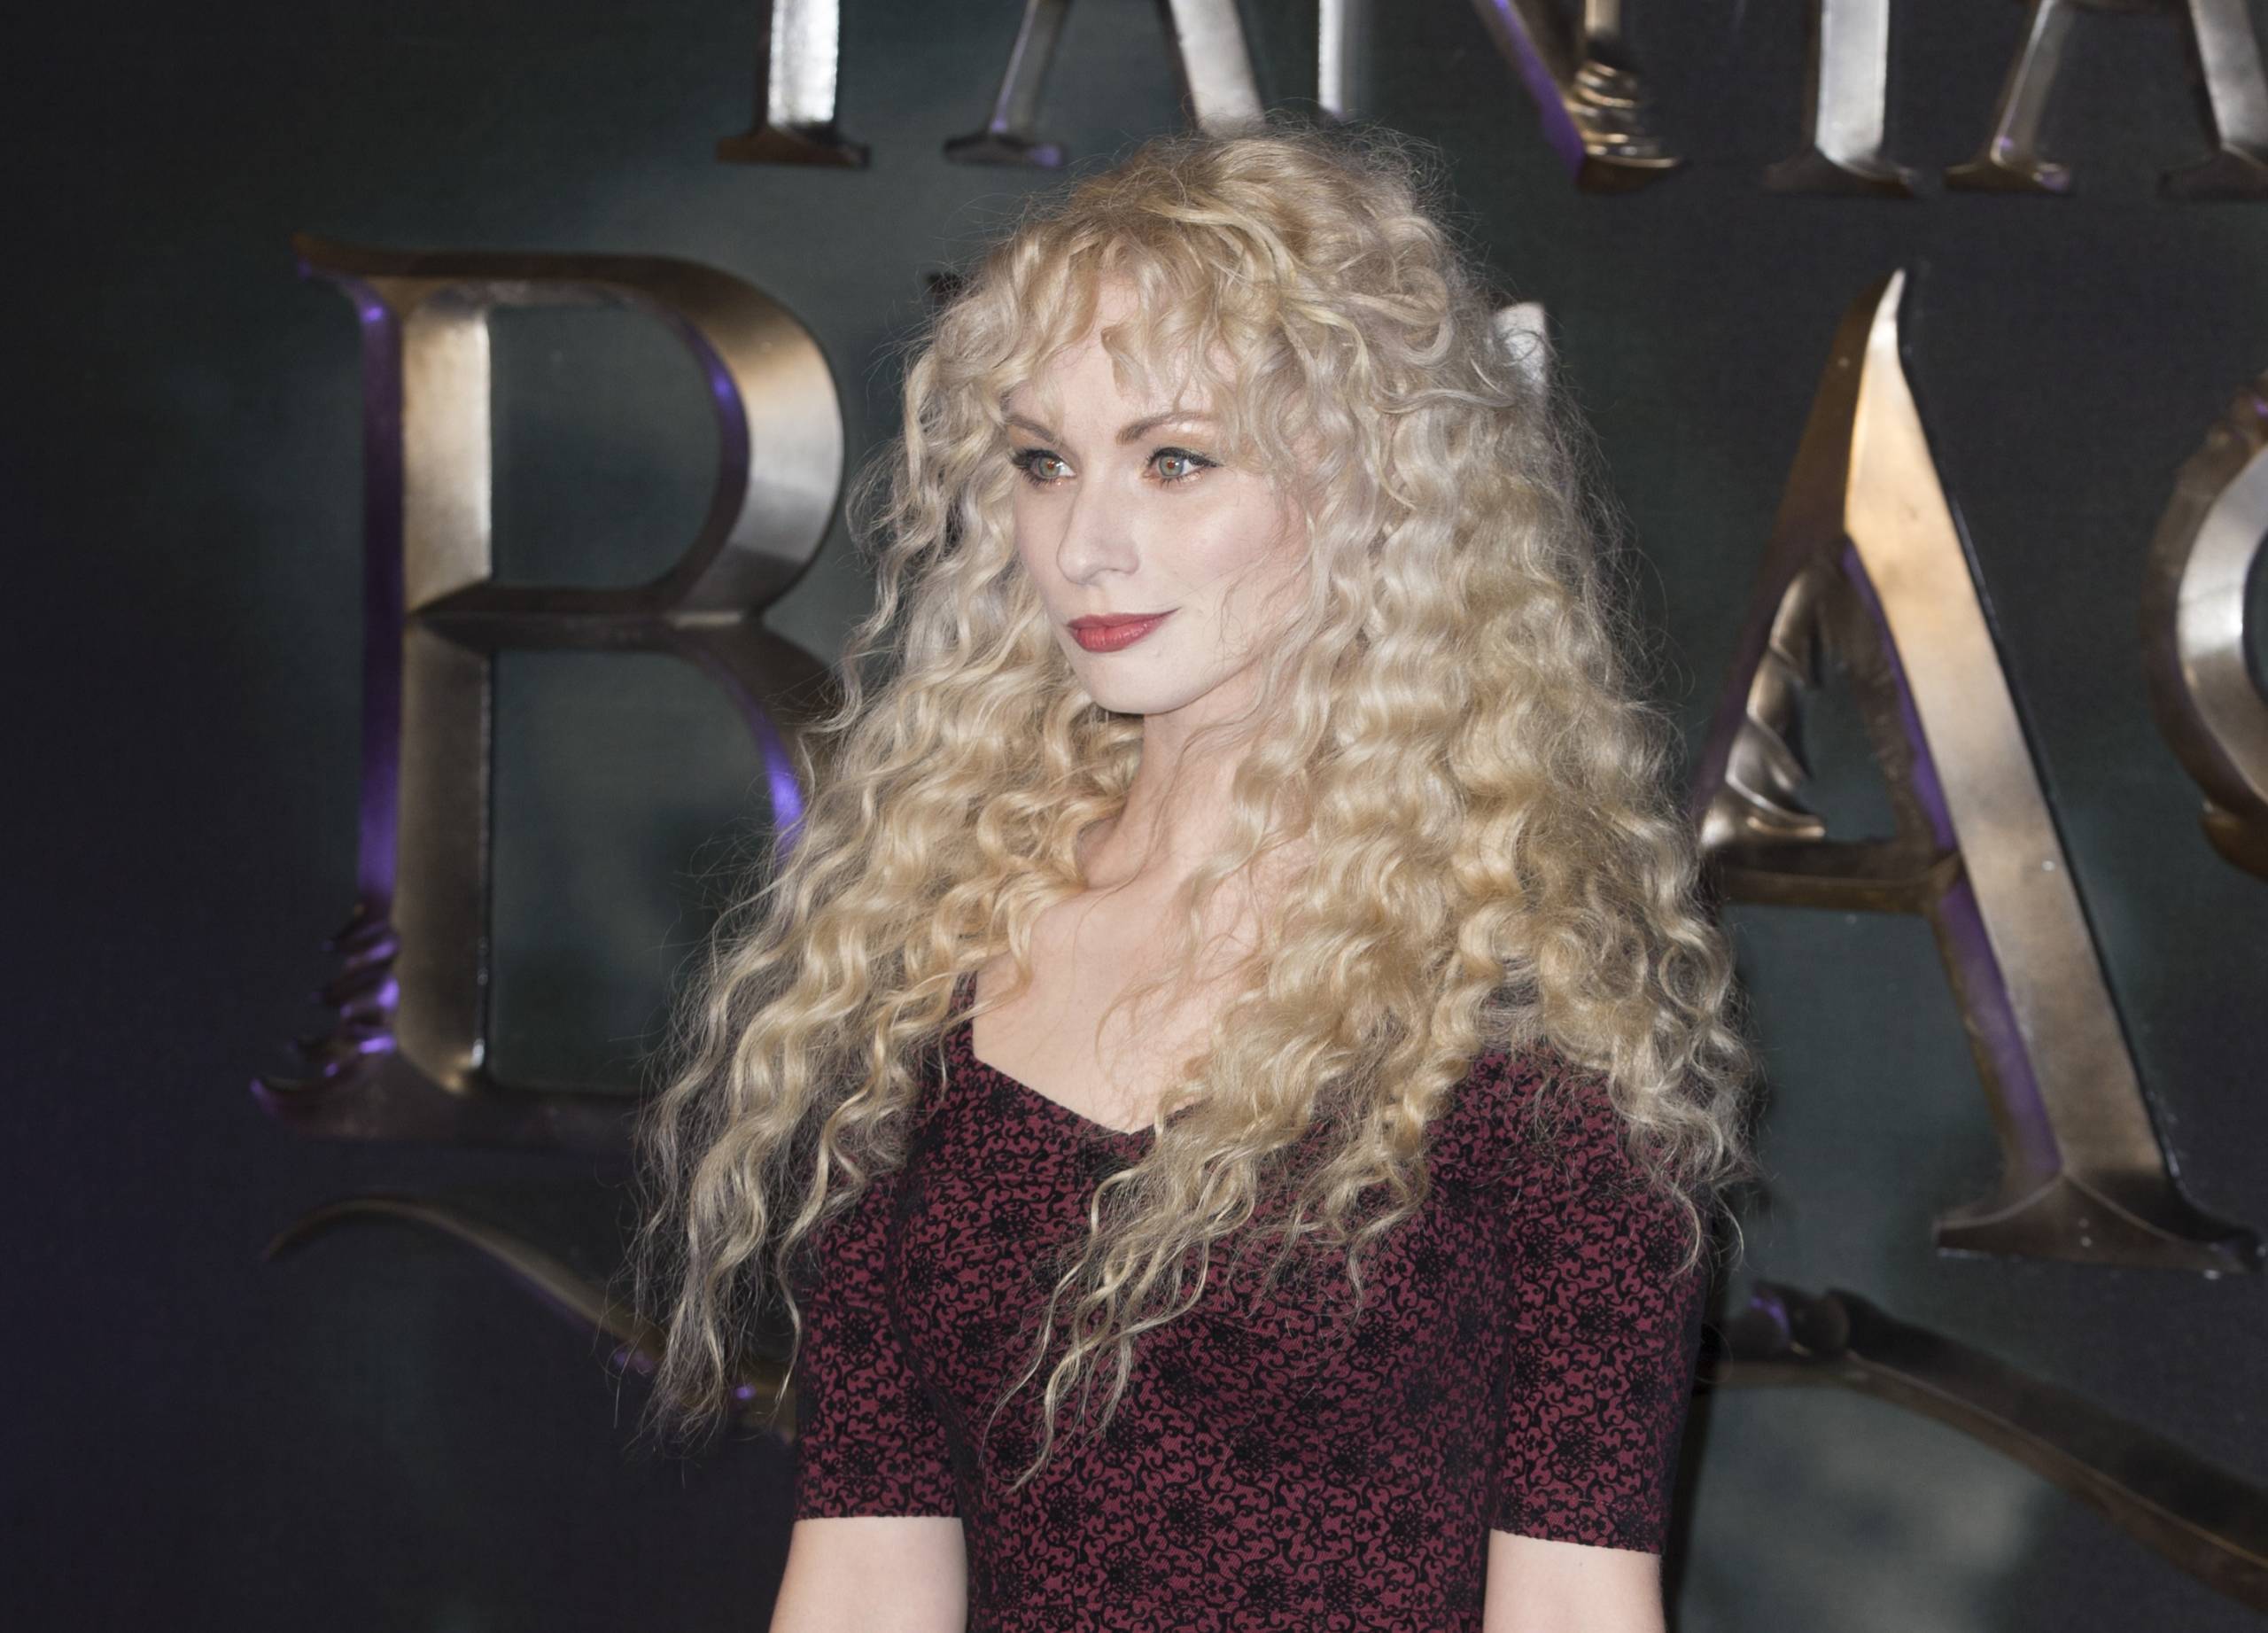 Singer-songwriter, Emmi at the European Premiere of Fantastic Beasts. 